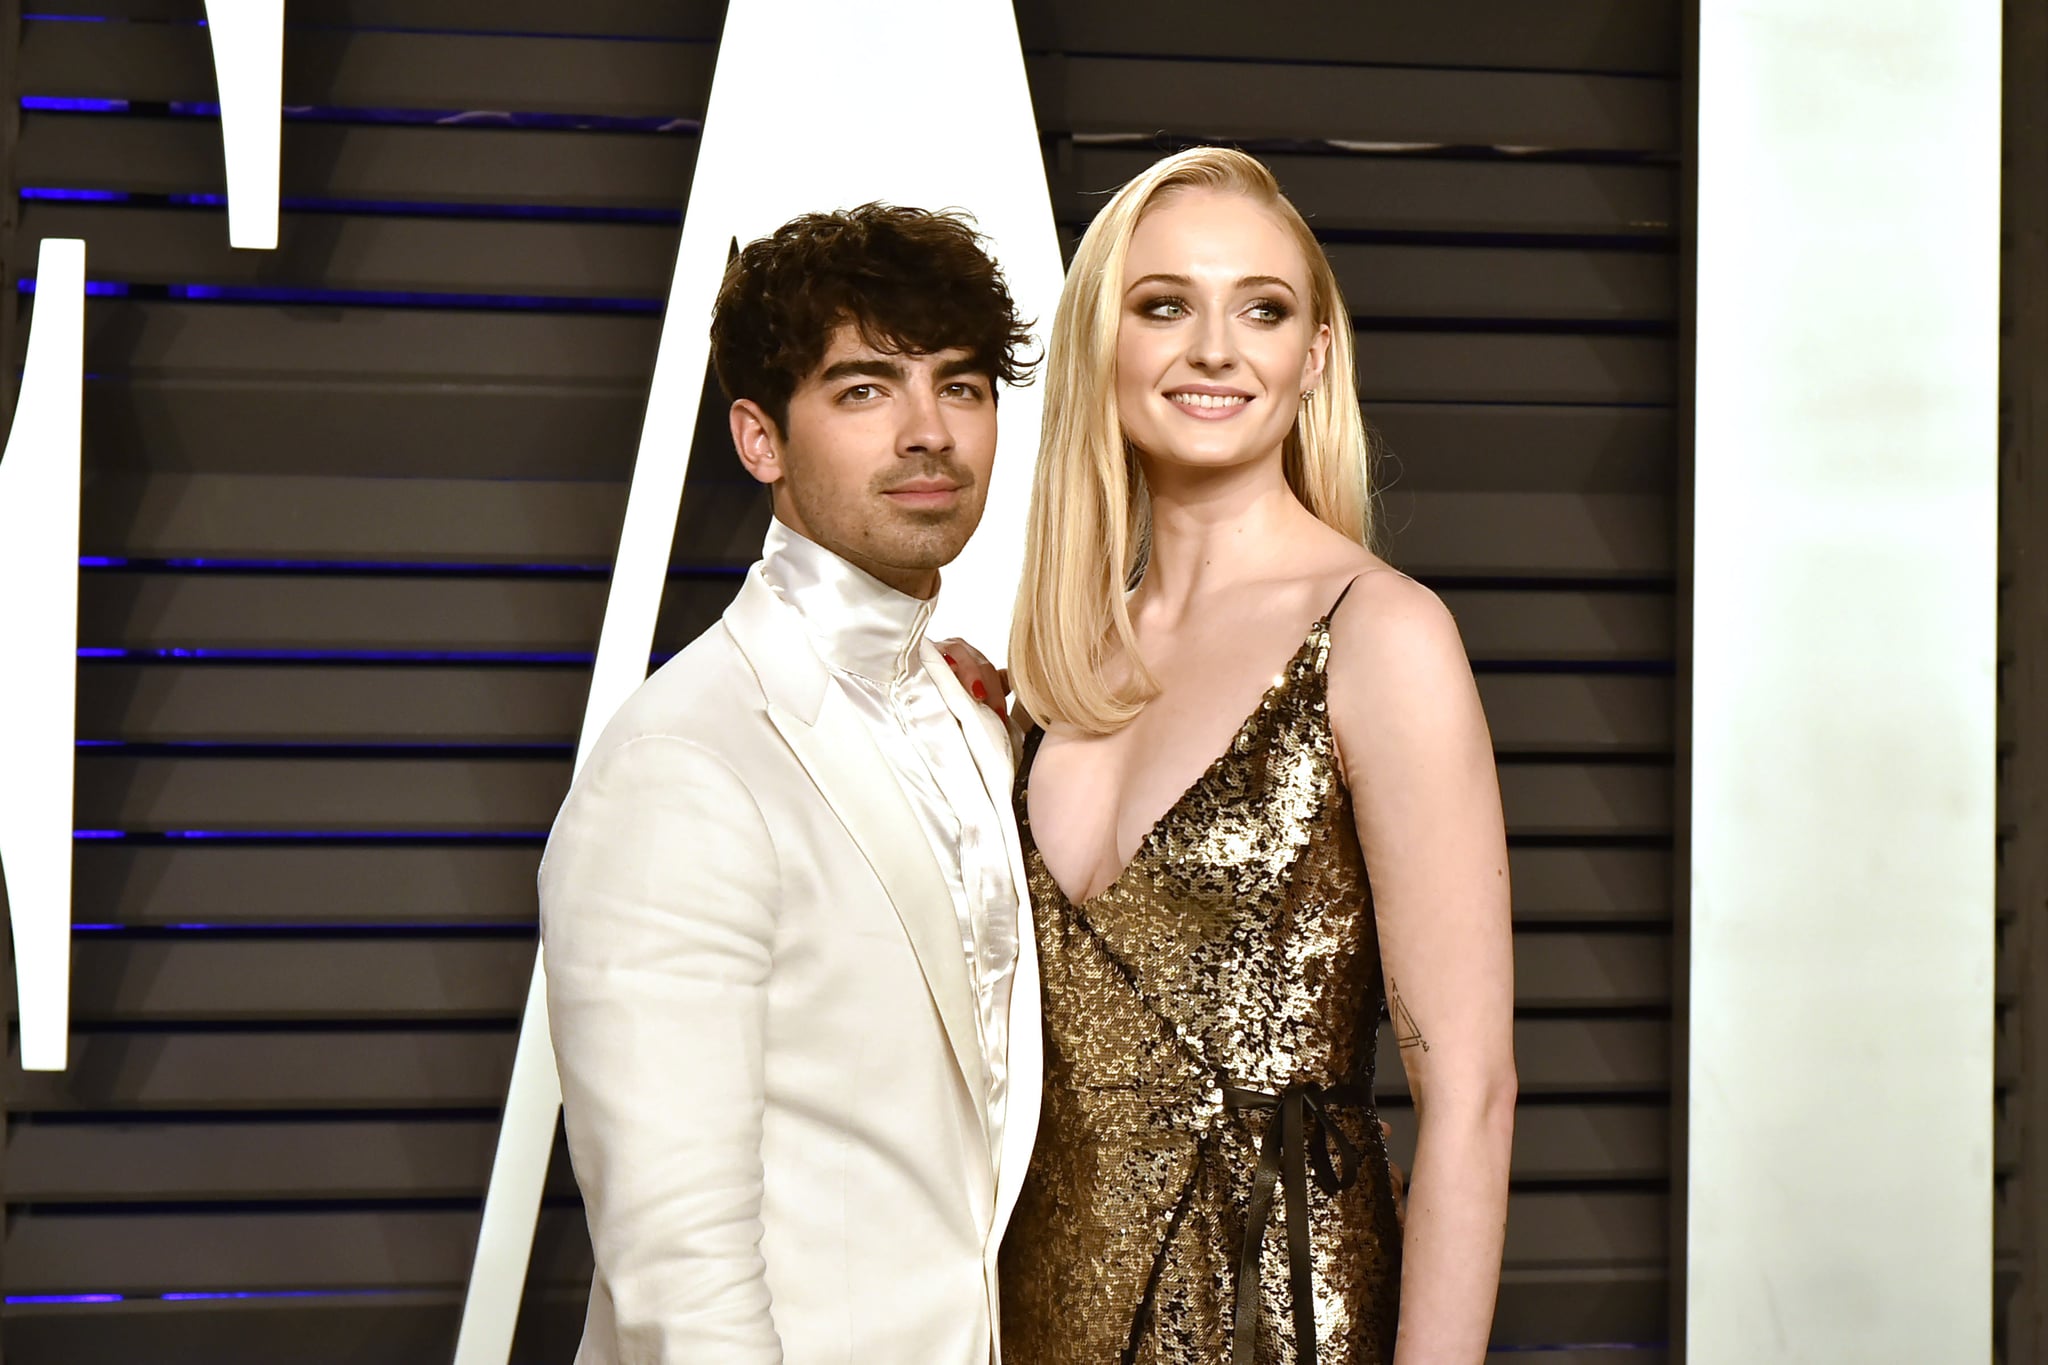 BEVERLY HILLS, CALIFORNIA - FEBRUARY 24: Joe Jonas and Sophie Turner attend the 2019 Vanity Fair Oscar Party at Wallis Annenberg Center for the Performing Arts on February 24, 2019 in Beverly Hills, California. (Photo by David Crotty/Patrick McMullan via Getty Images)